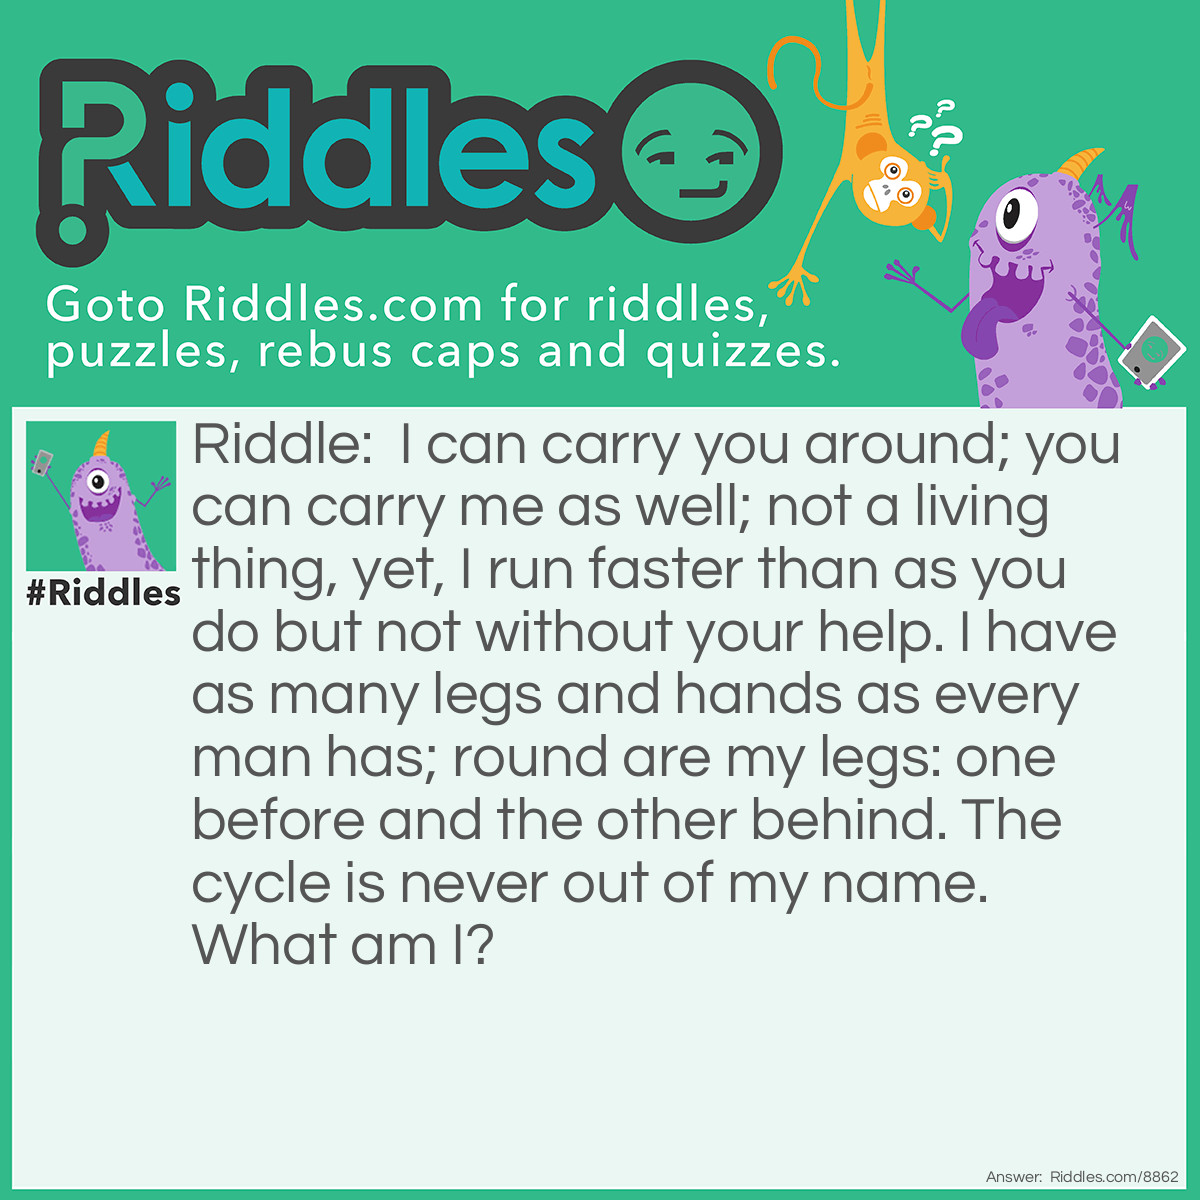 Riddle: I can carry you around; you can carry me as well; not a living thing, yet, I run faster than as you do but not without your help. I have as many legs and hands as every man has; round are my legs: one before and the other behind. The cycle is never out of my name. What am I? Answer: Bicycle.